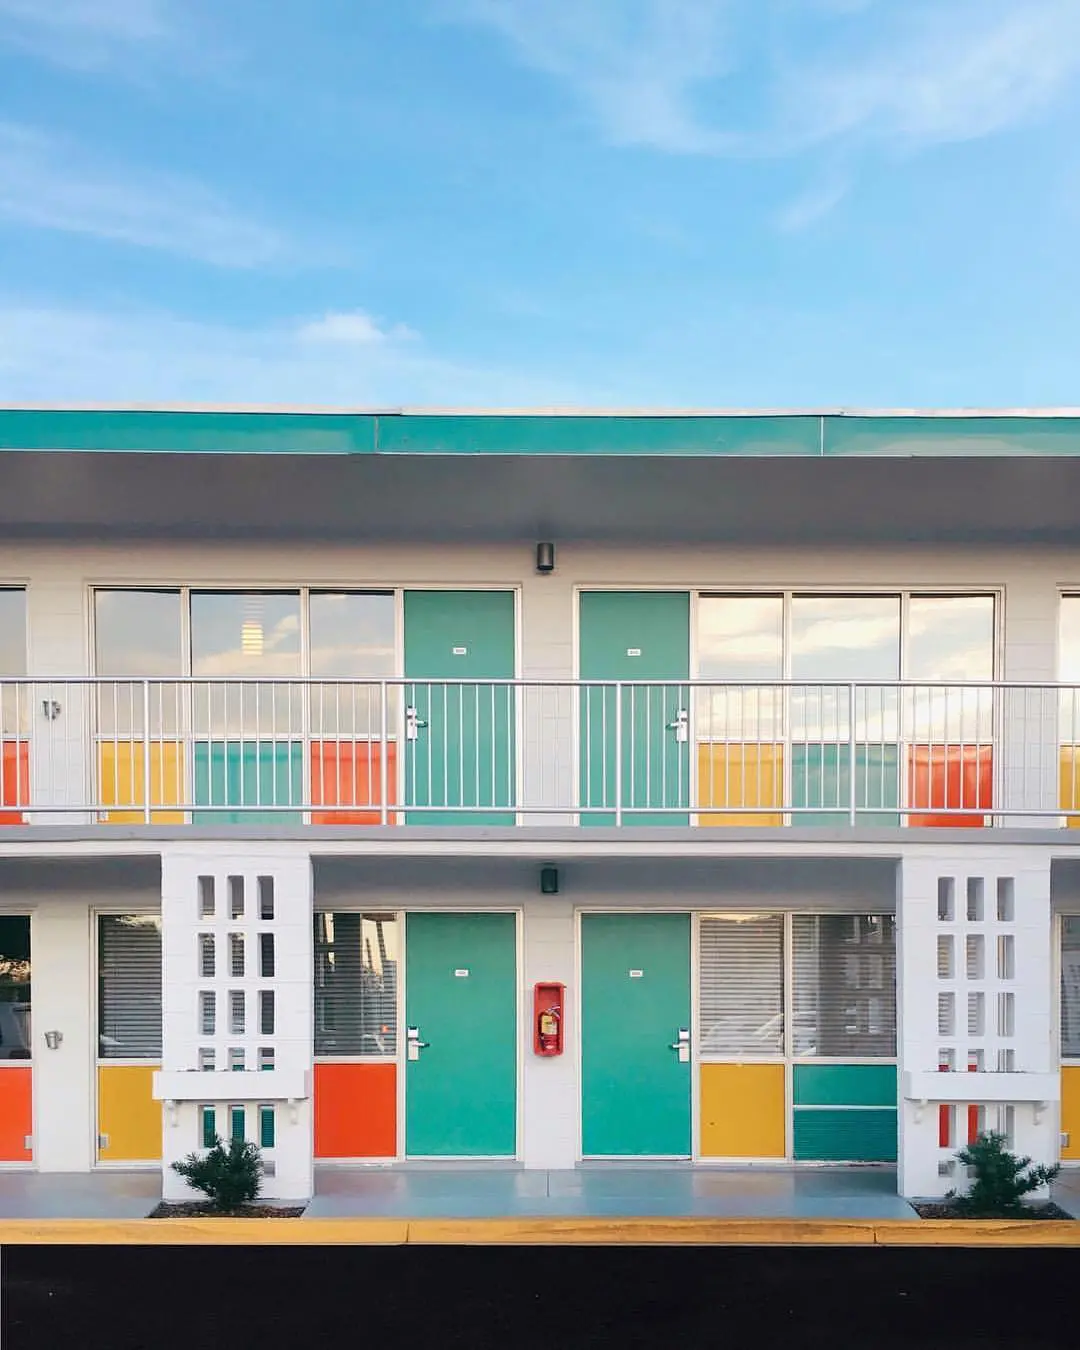 Retro Hotels To Inspire Your Senses: A Journey Back to the '50s and '60s